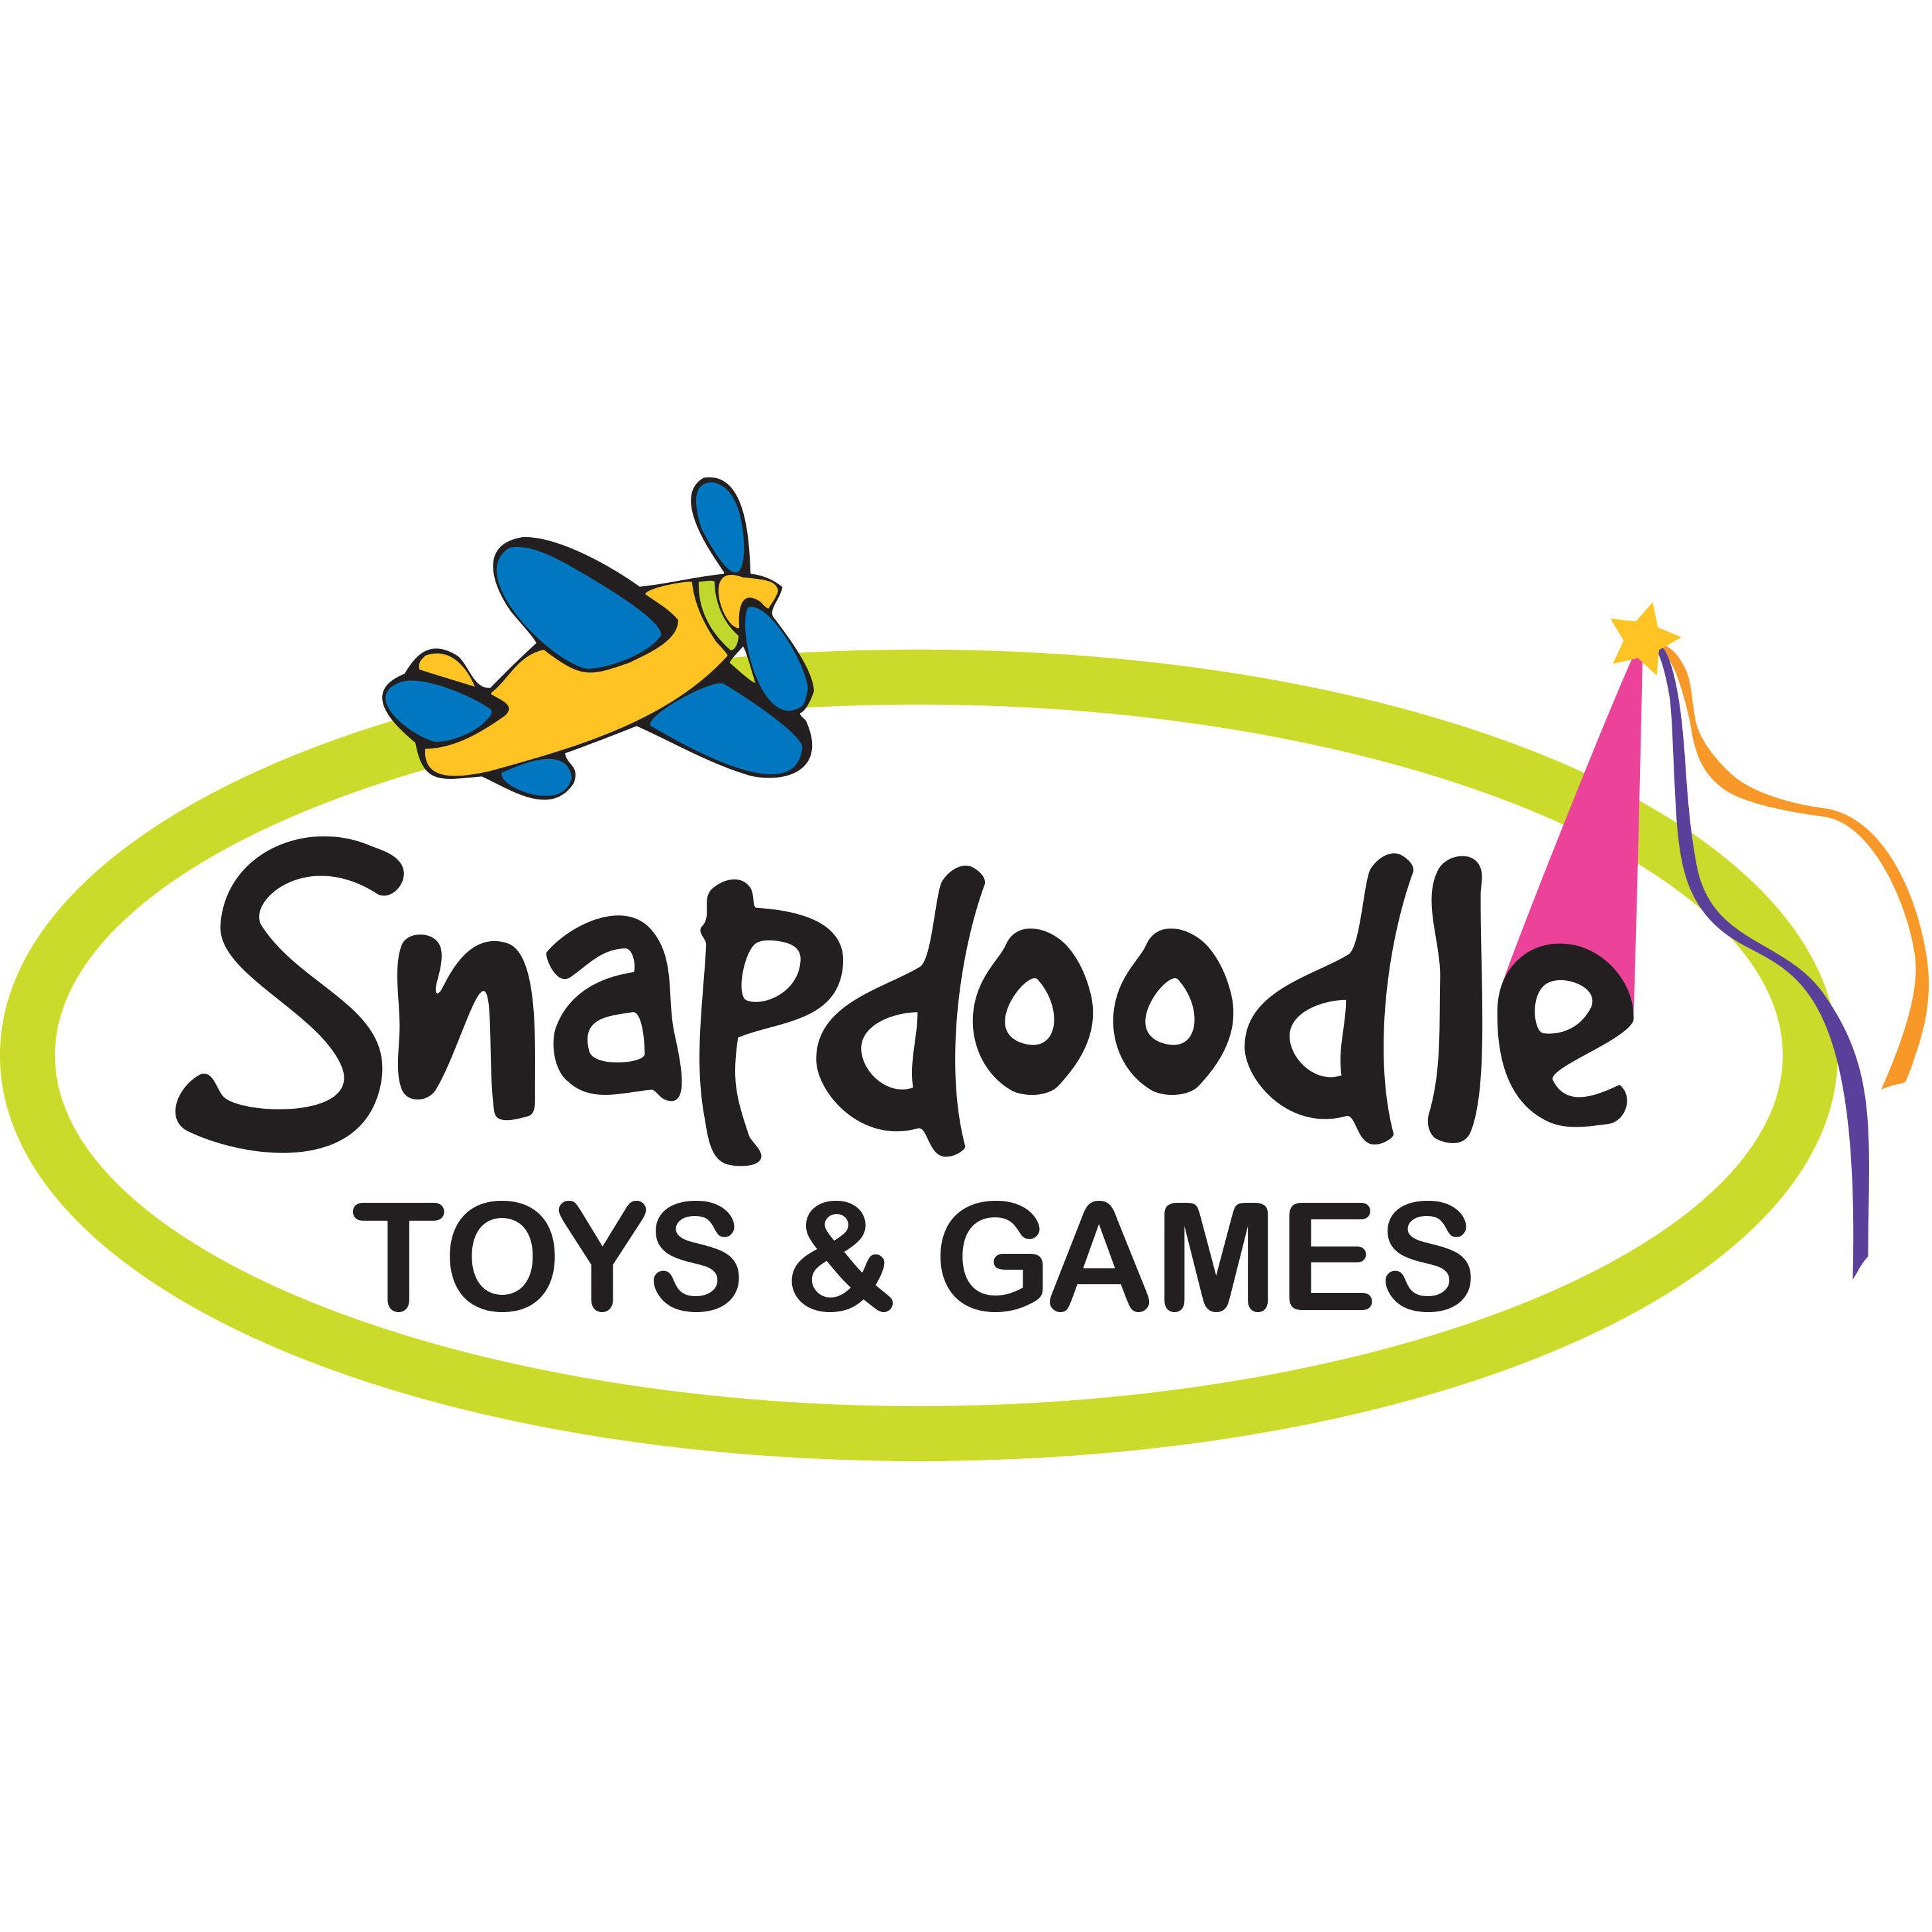 Snapdoodle Toys & Games Seattle